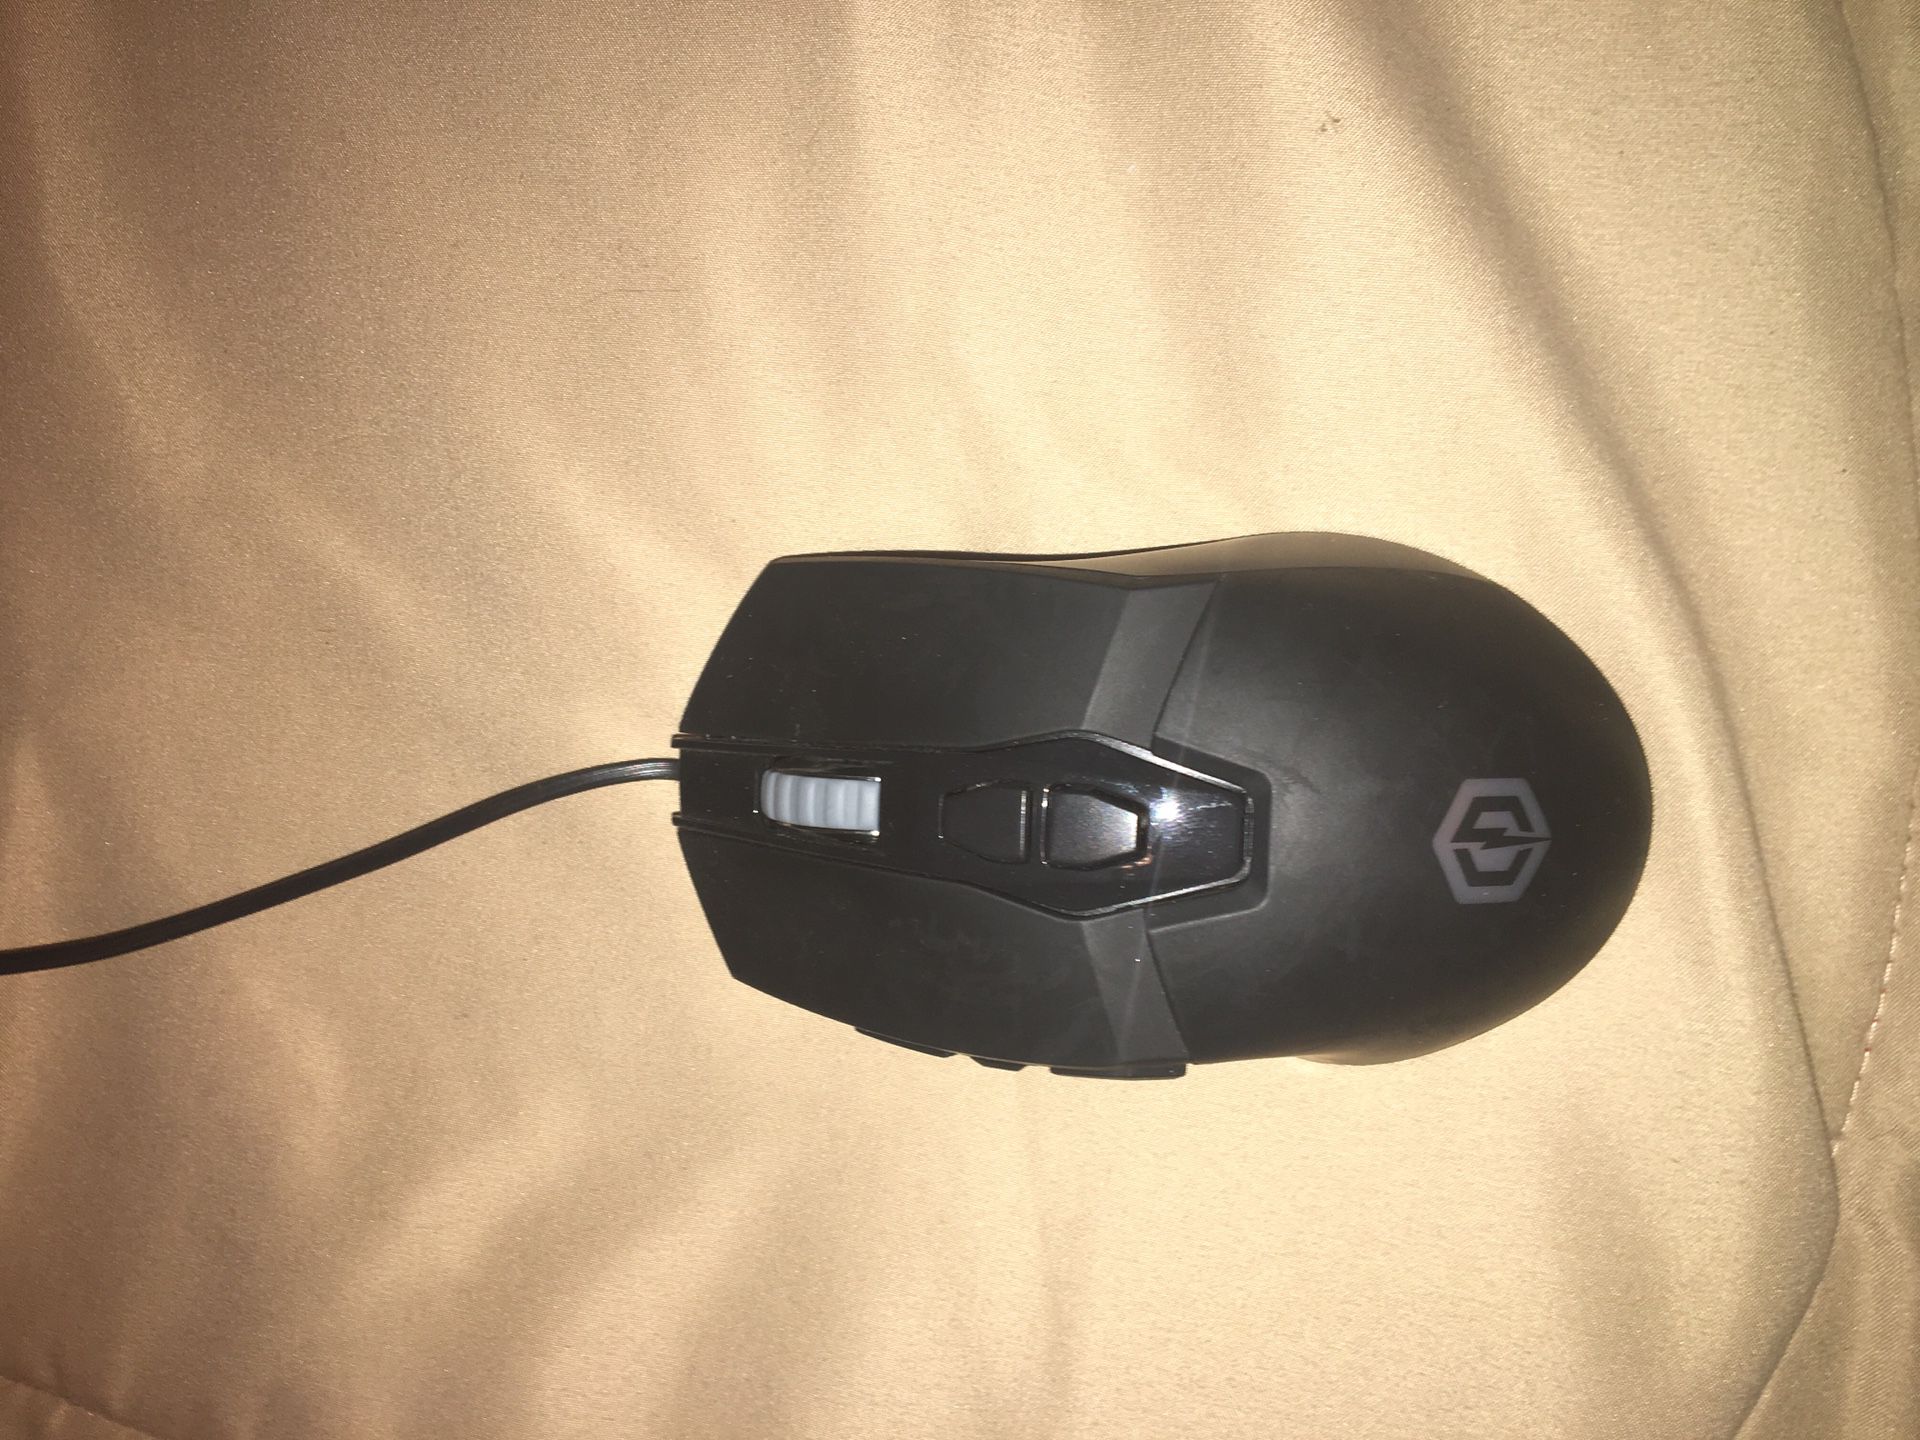 CyberPower Mouse